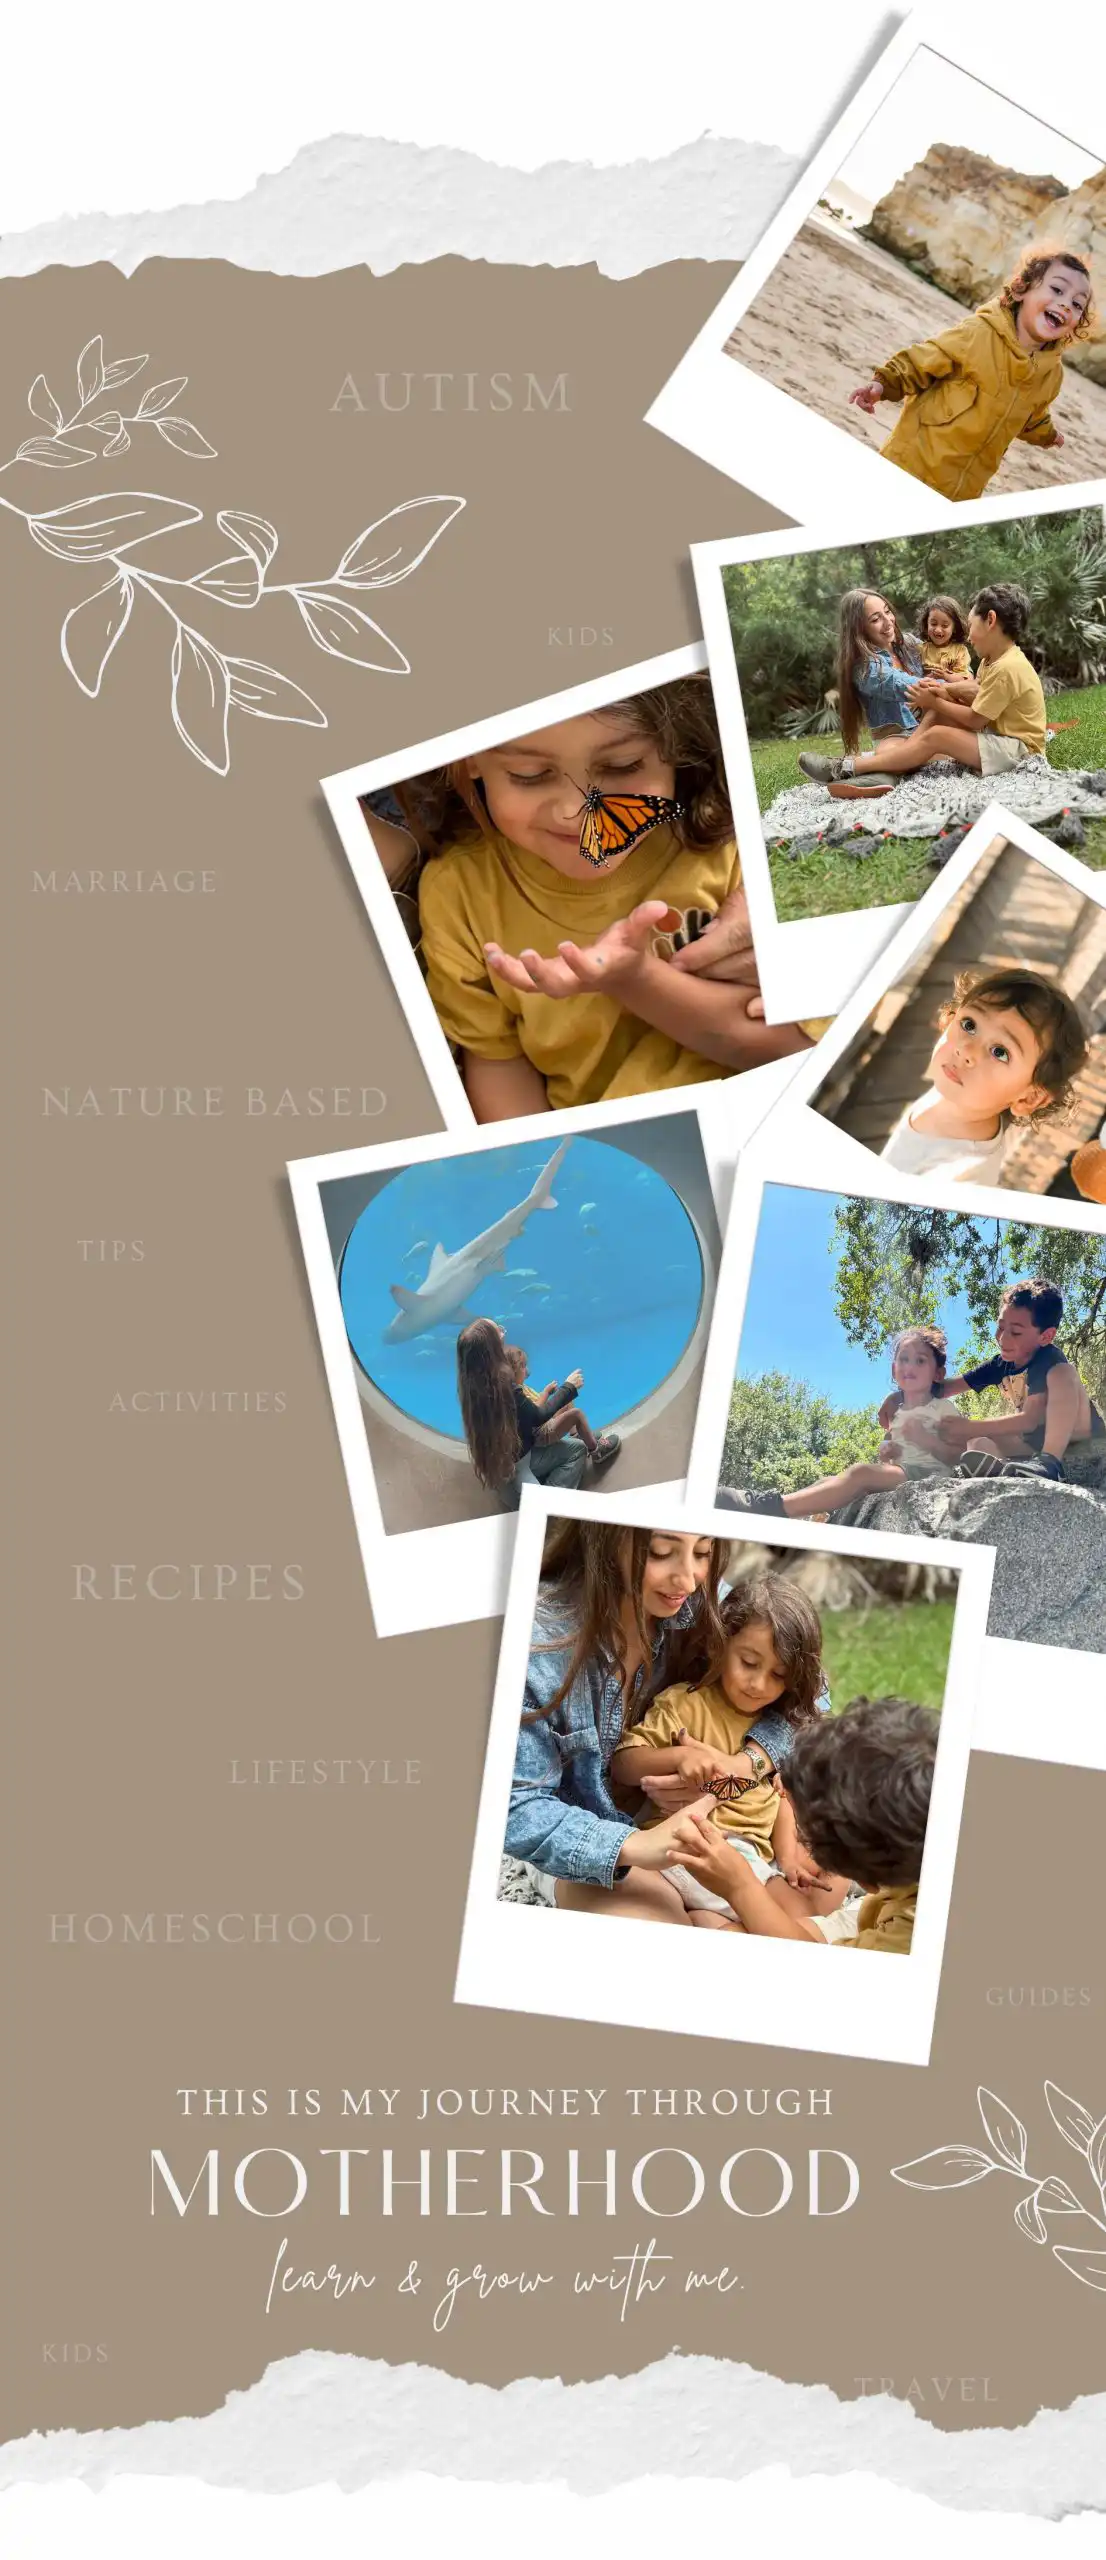 A collage featuring candid photographs of a mother and her children on their journey through motherhood. The background is an earthy beige with delicate white leaf illustrations. Keywords include Autism, Kids, Marriage, Nature Based, Tips, Activities, Recipes, Lifestyle, Homeschool, Guides, and Travel. The images show children interacting with a butterfly, siblings exploring outdoors, and a family visit to an aquarium. Text reads, 'This is my journey through motherhood. Learn & grow with me.